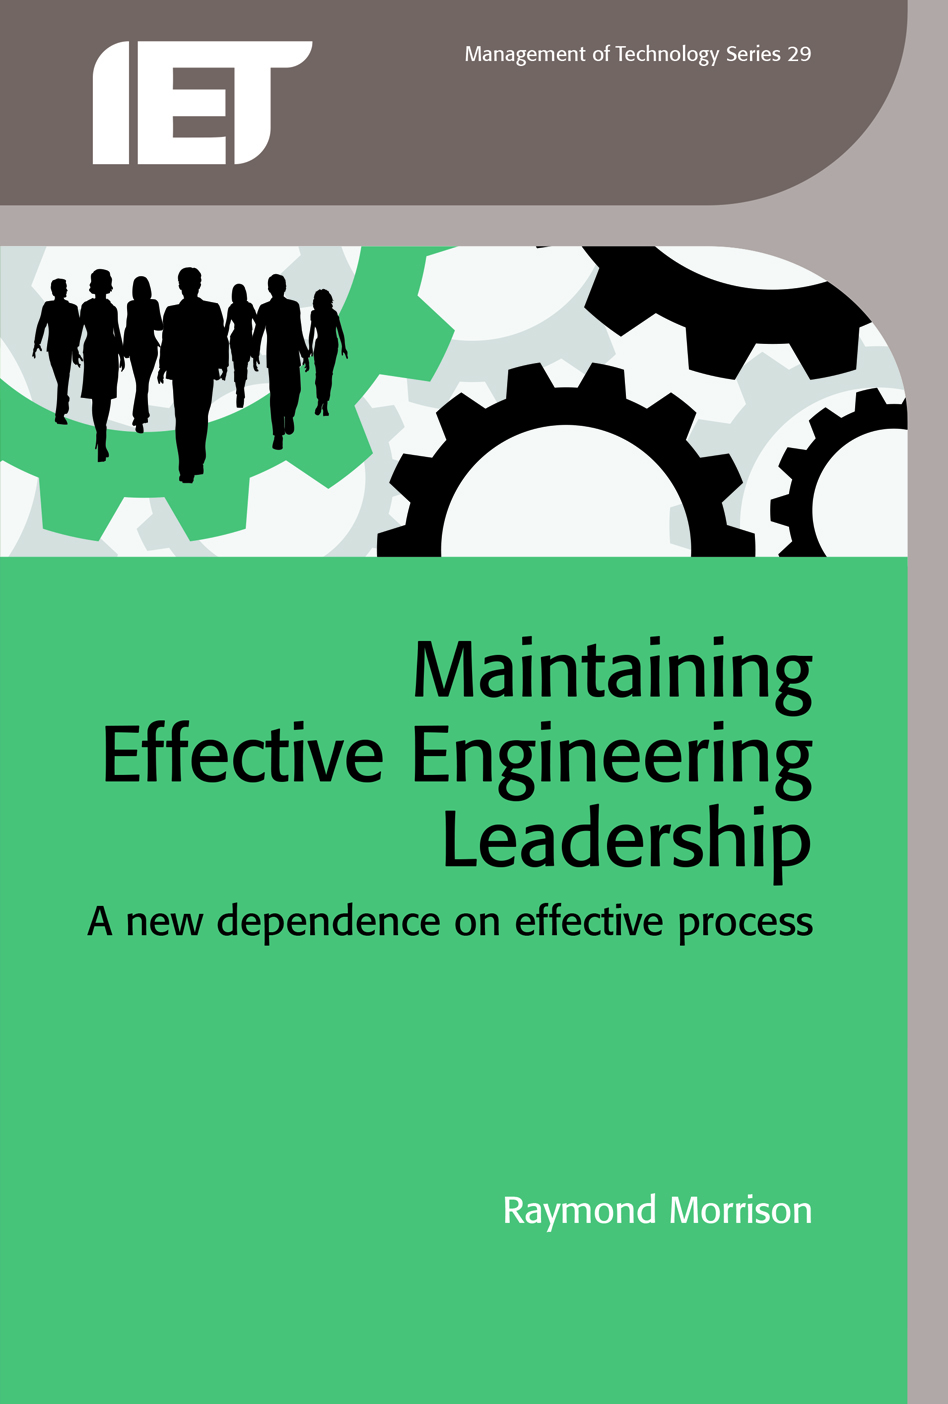 Maintaining Effective Engineering Leadership, A new dependence on effective process